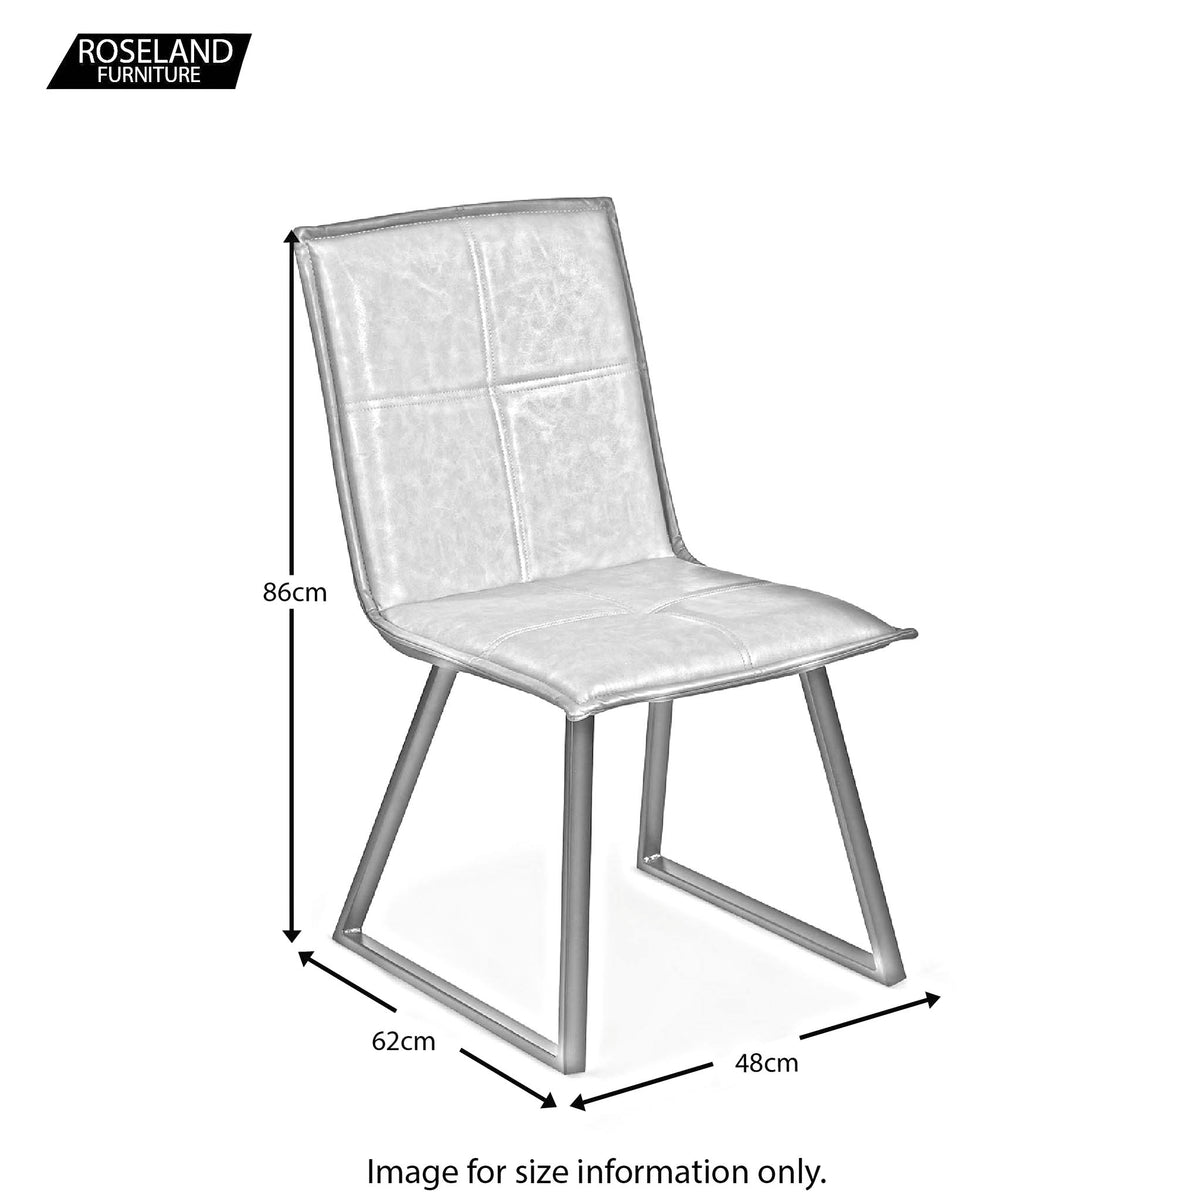 Lucca Dining Chair - Size Guide